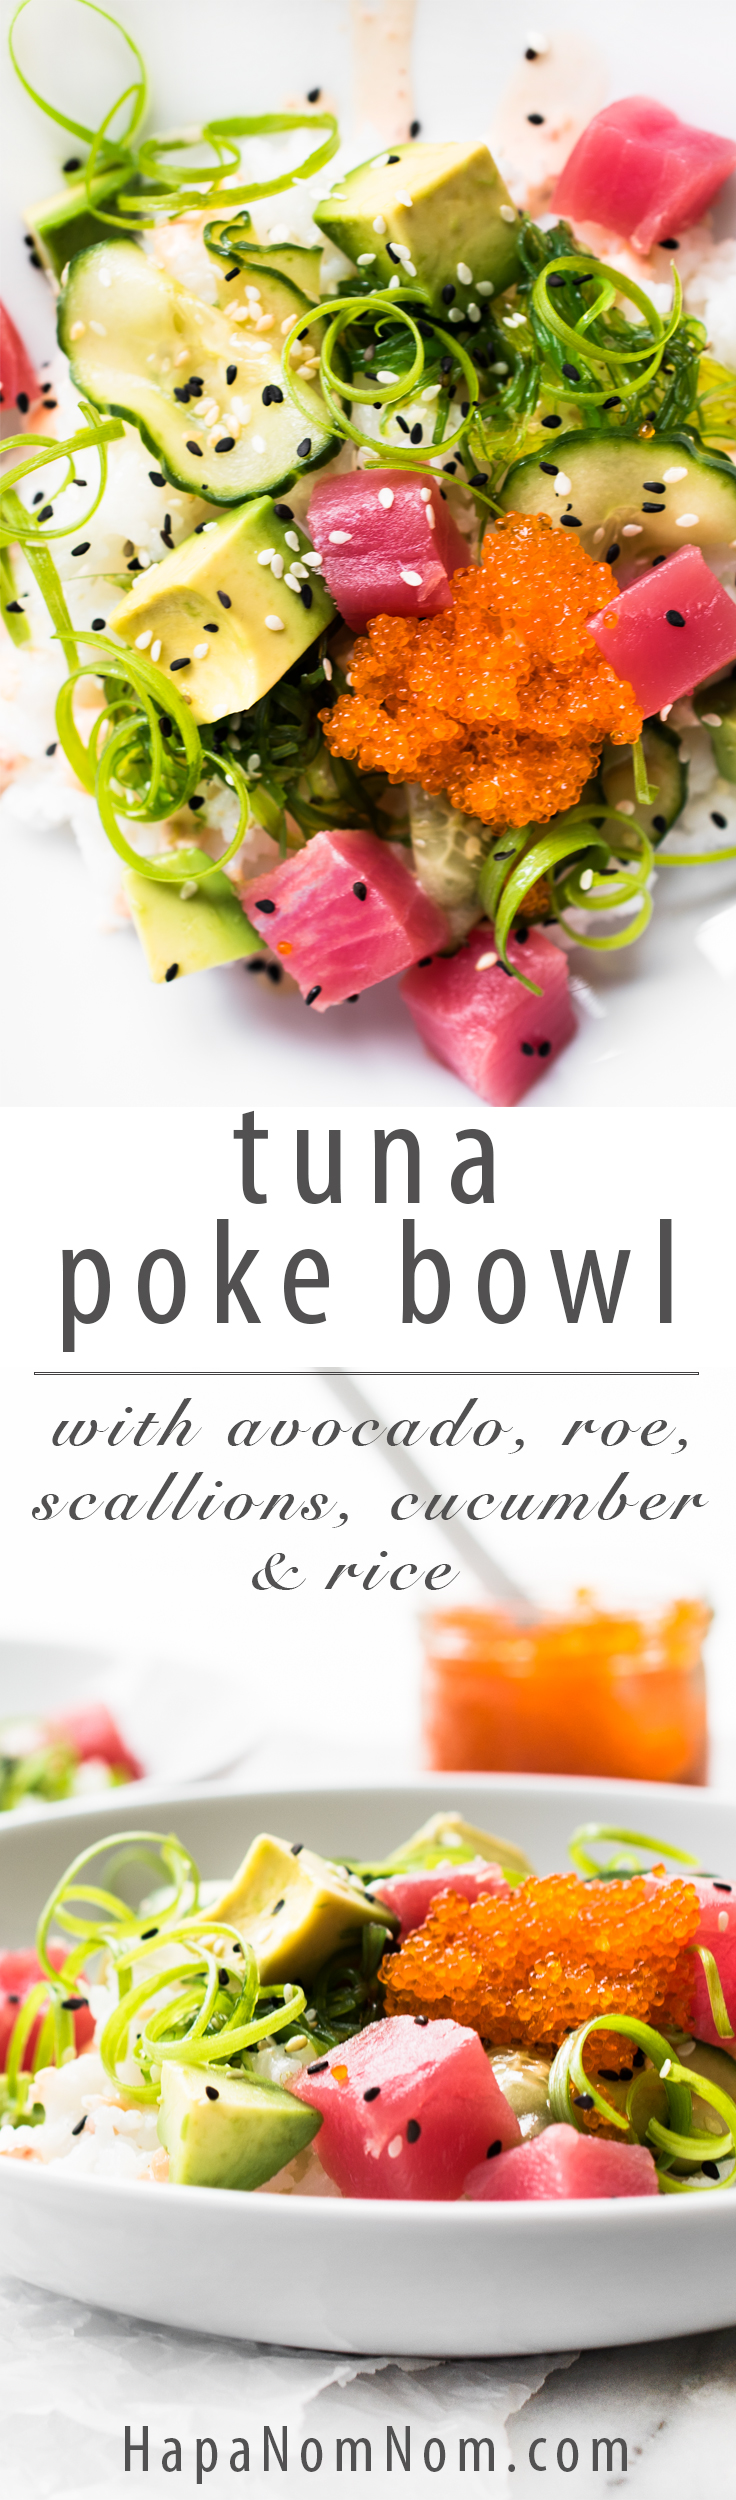 Light, refreshing Avocado Tuna Poke Bowl - loaded with healthy ingredients and complimenting flavors and textures! There's a lot going on in one little bite!